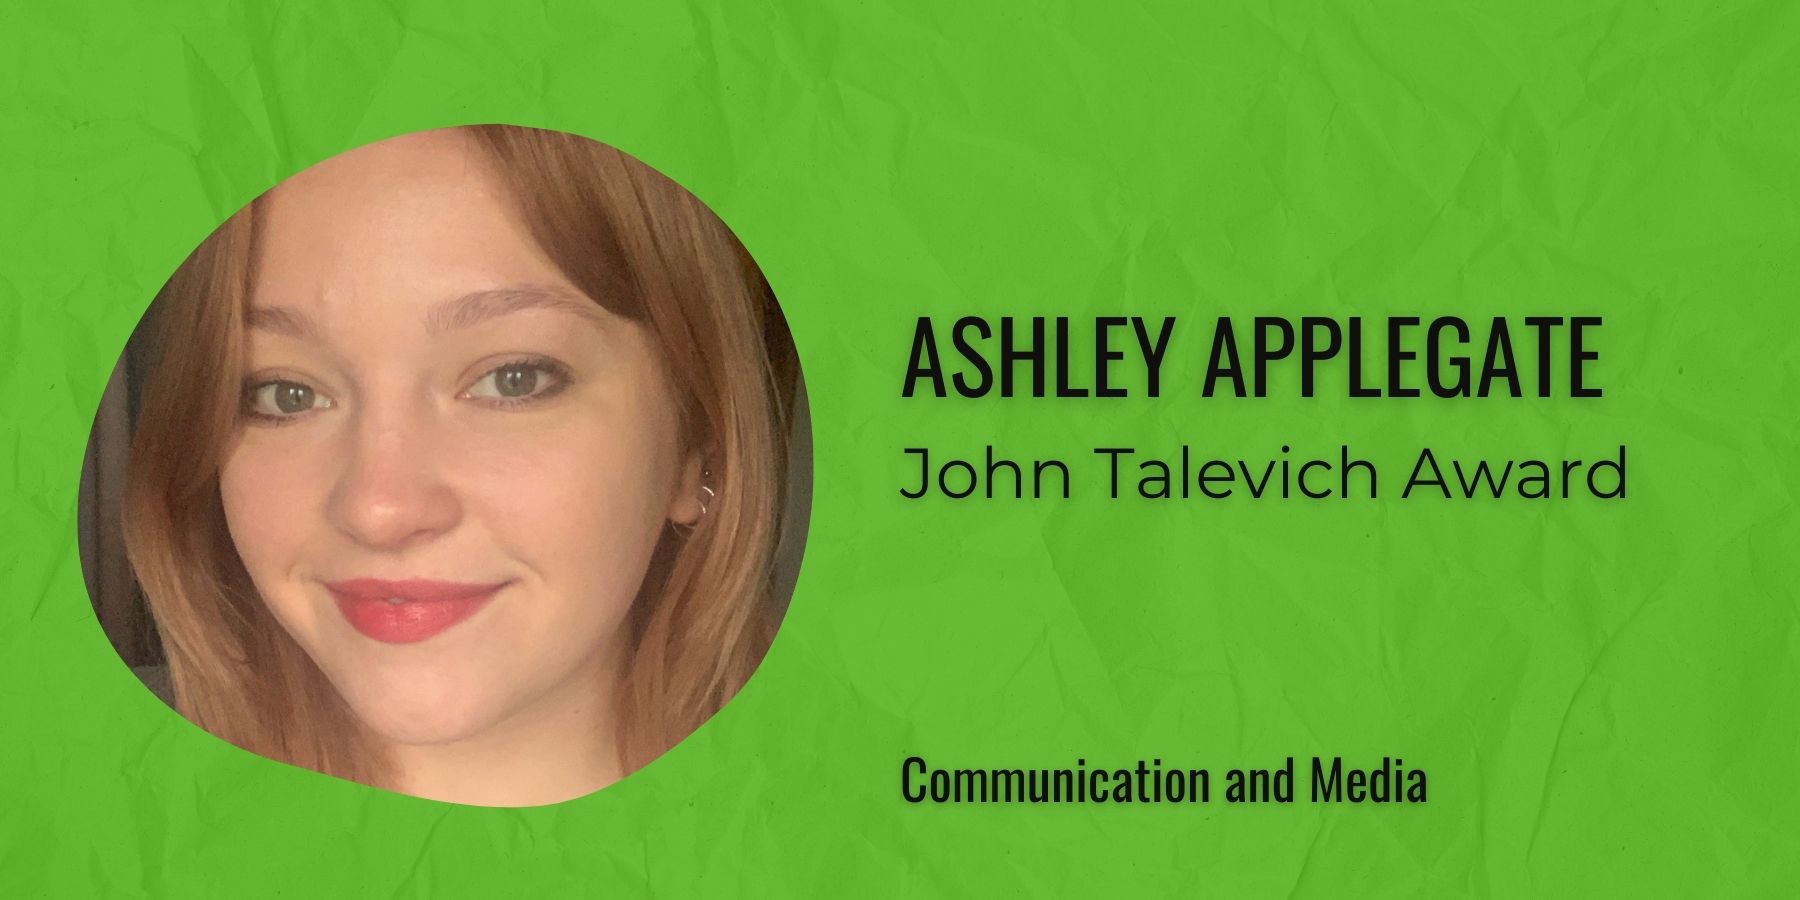 Image of Ashley Applegate with text: John Talevich Award, Communication and Media
